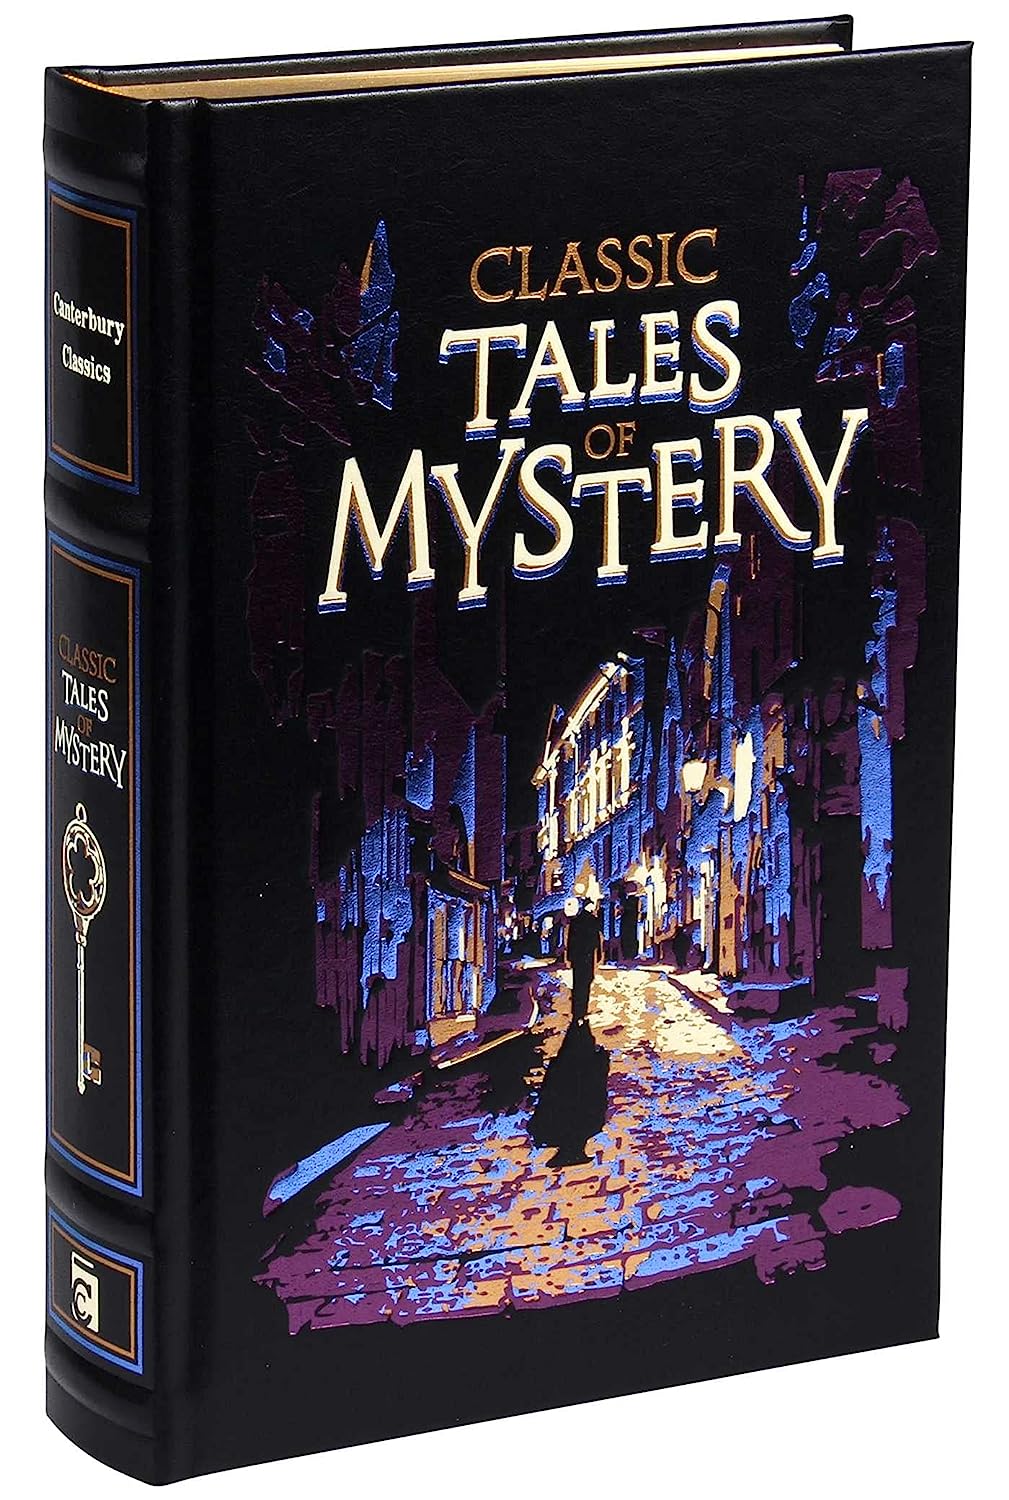 Artbook - Sách Tiếng Anh - Classic Tales of Mystery (Leather-bound Classics)